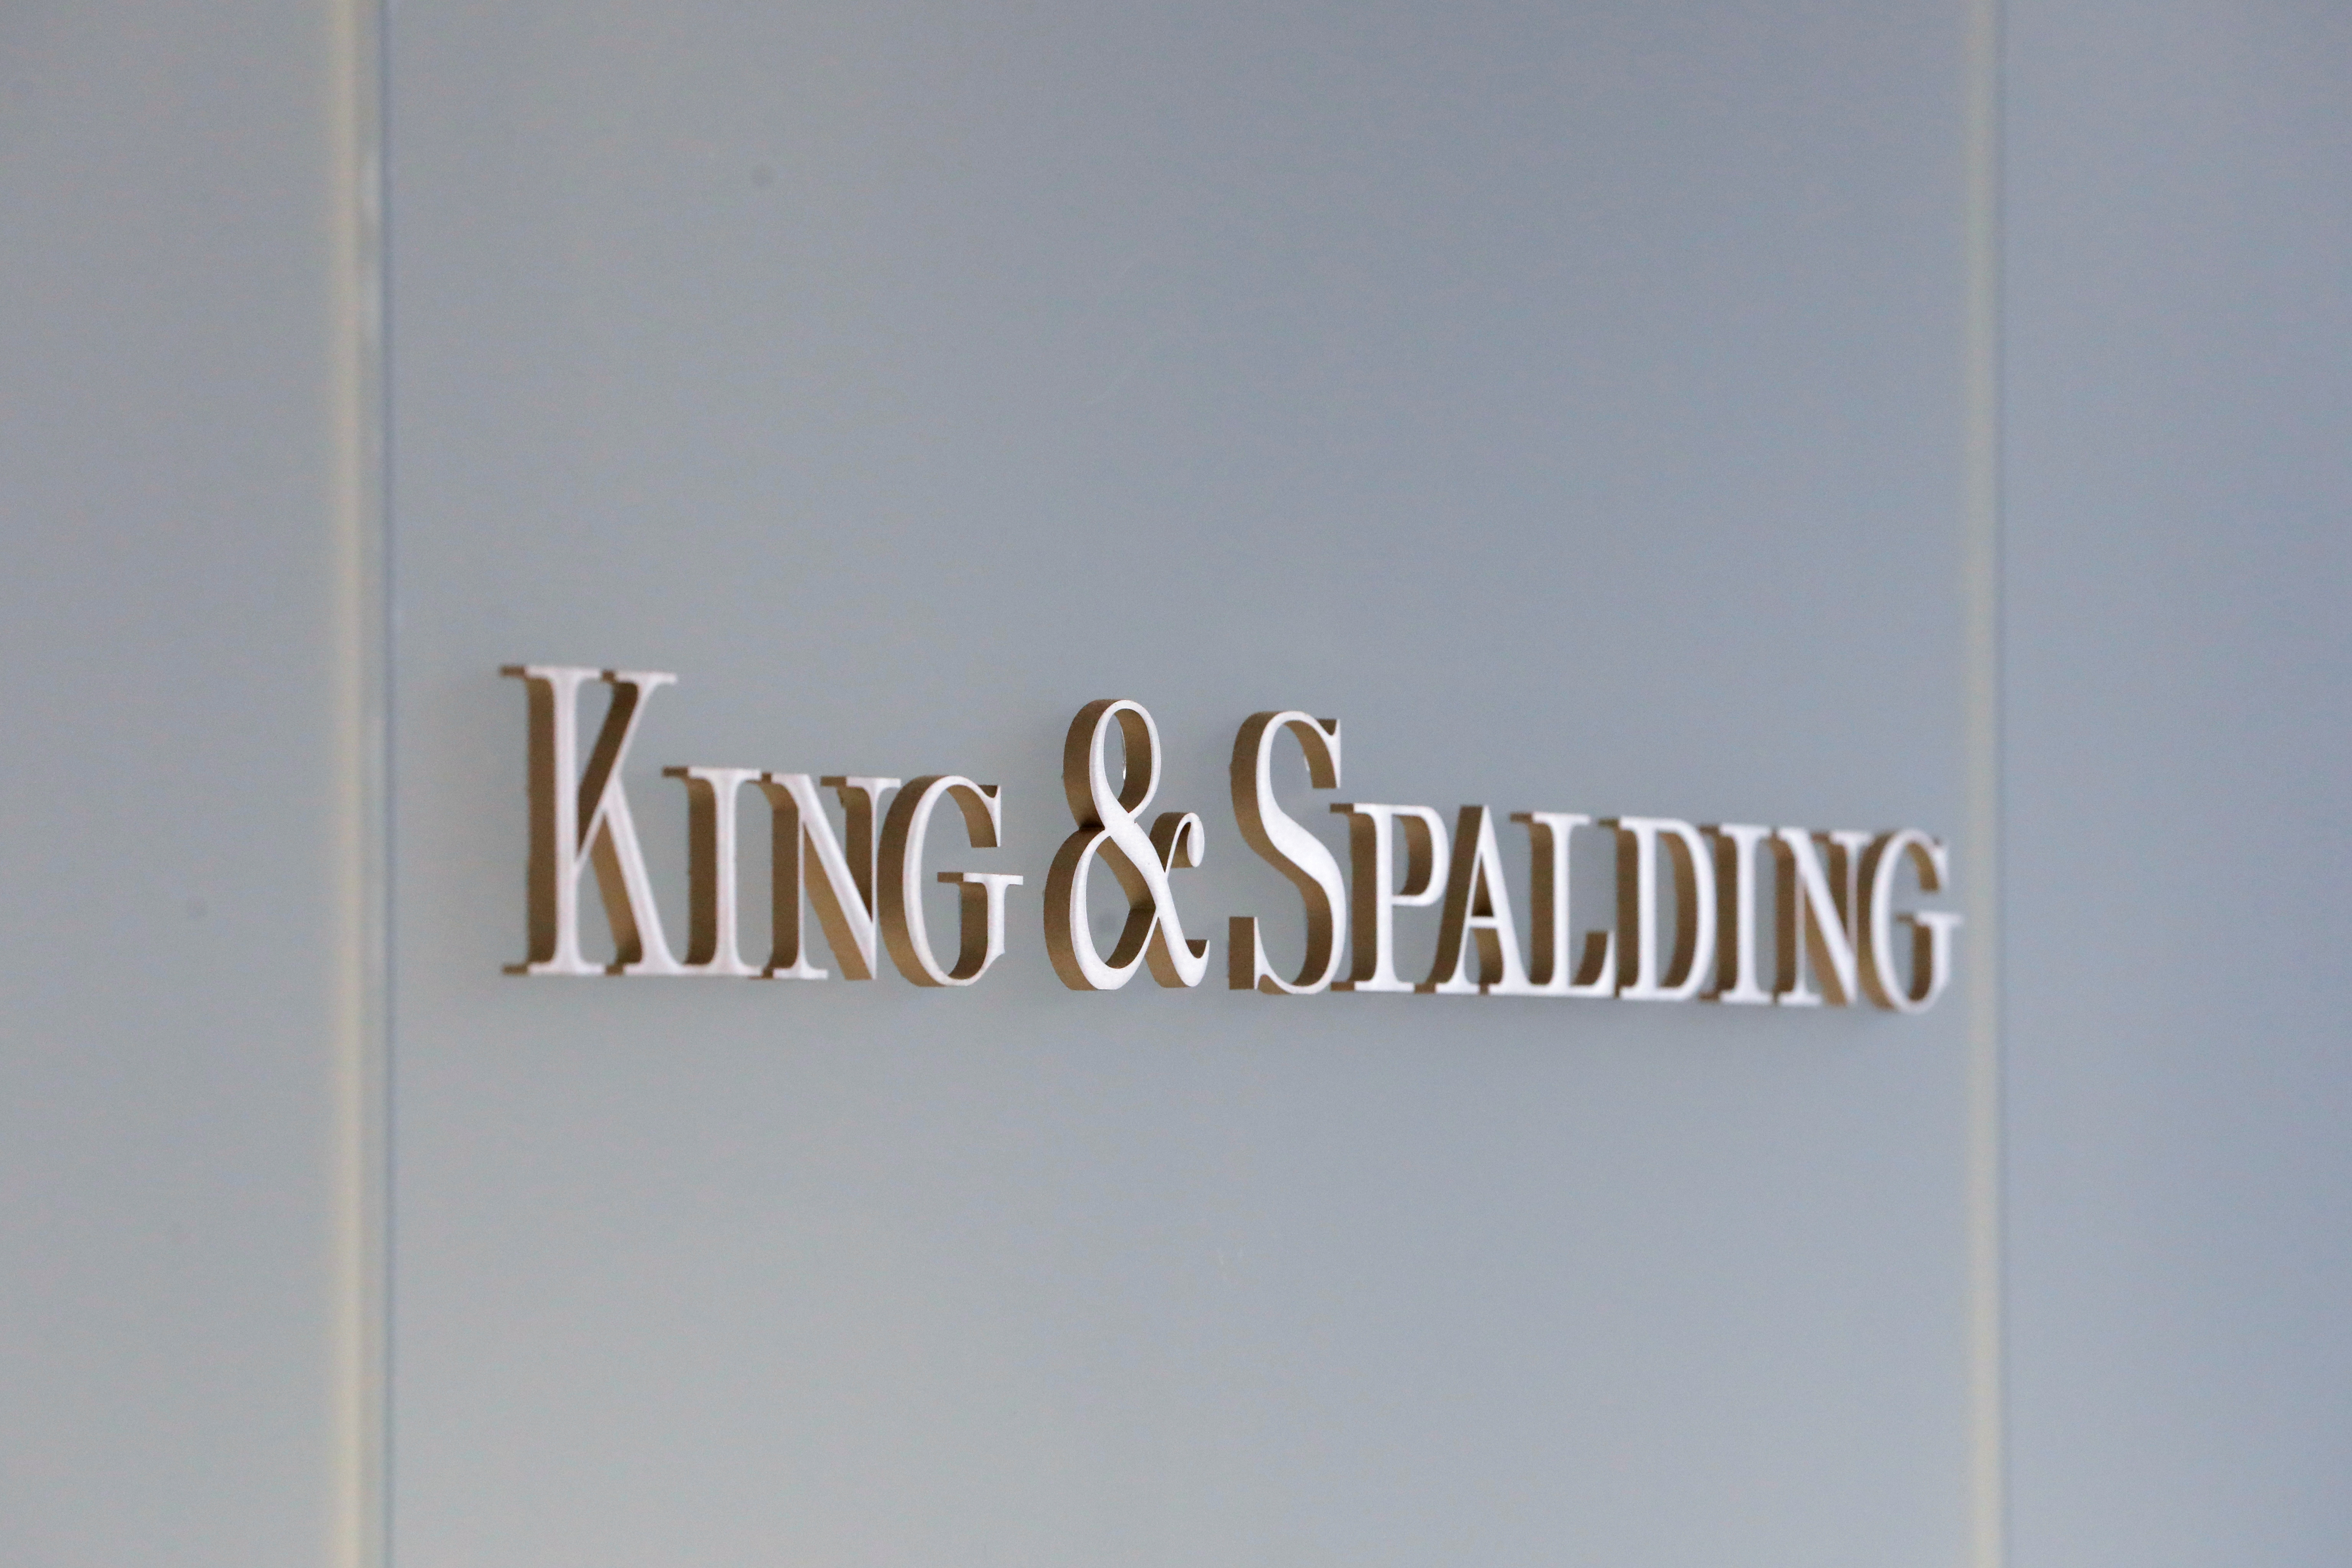 The company logo of the law firm King & Spalding is seen in their legal offices in Manhattan, New York City, New York, U.S., May 5, 2021. REUTERS/Andrew Kelly